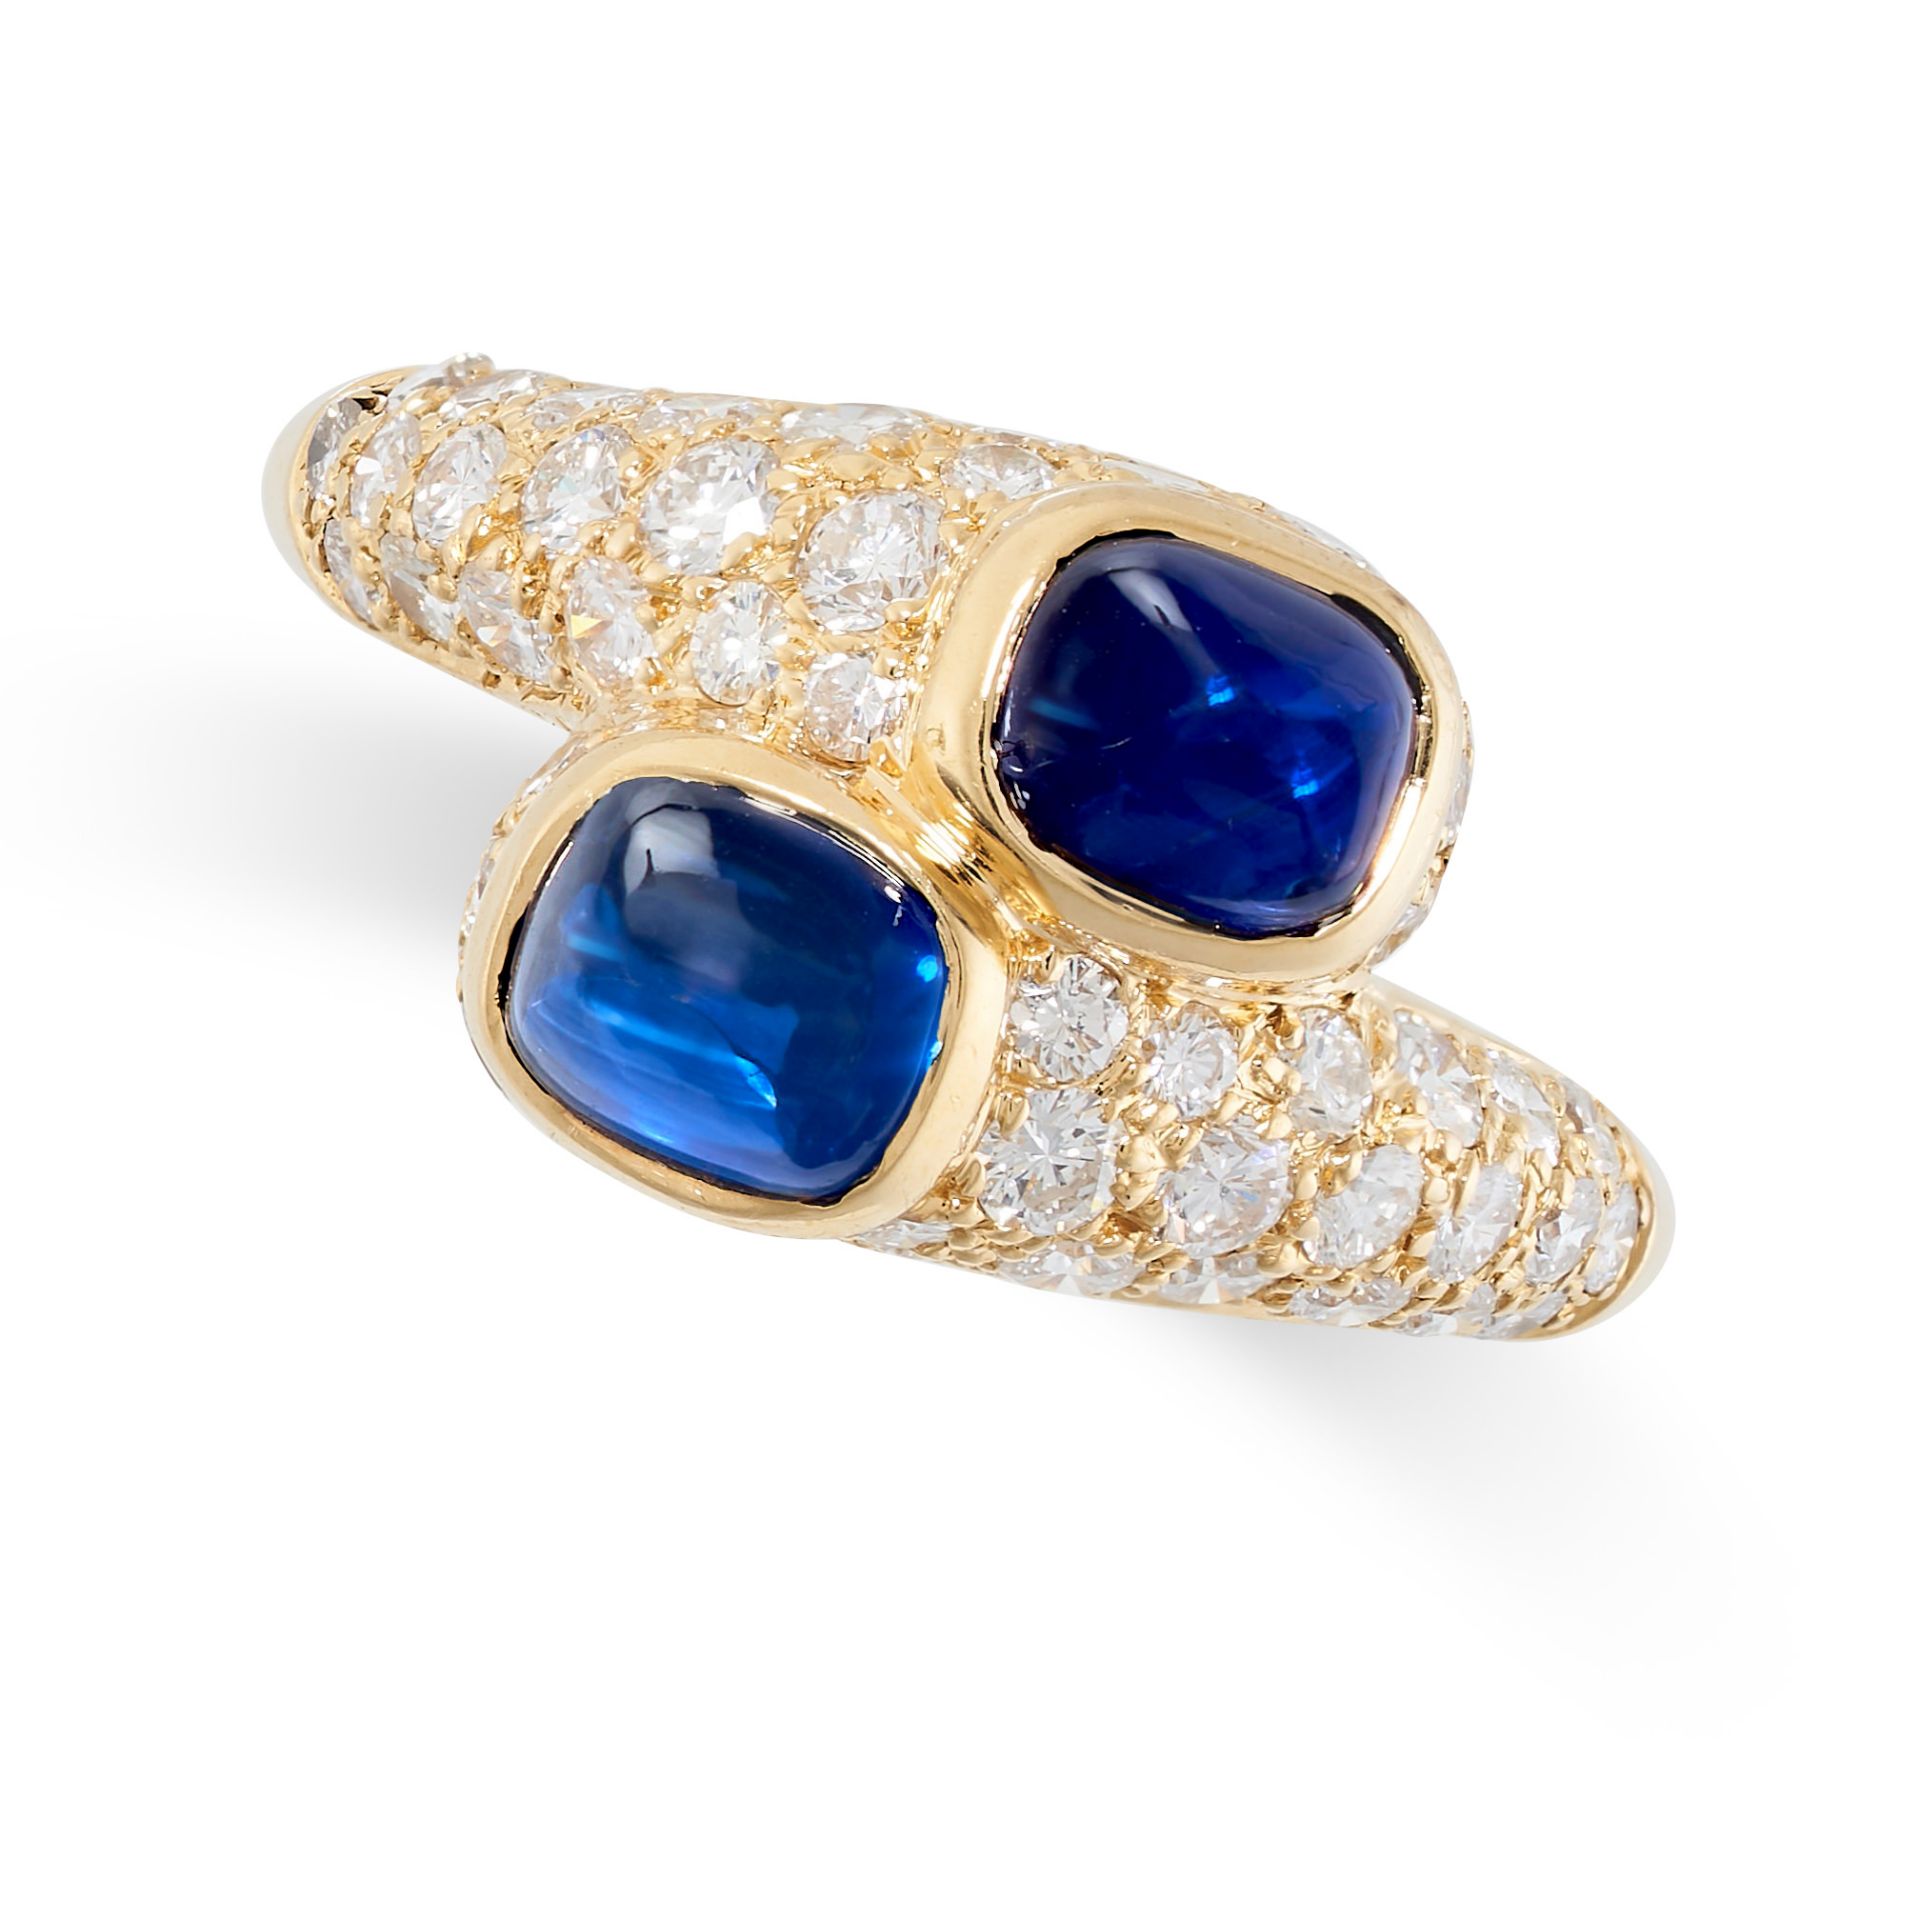 CARTIER, A SAPPHIRE AND DIAMOND CROSSOVER RING in 18ct yellow gold, set with two cabochon